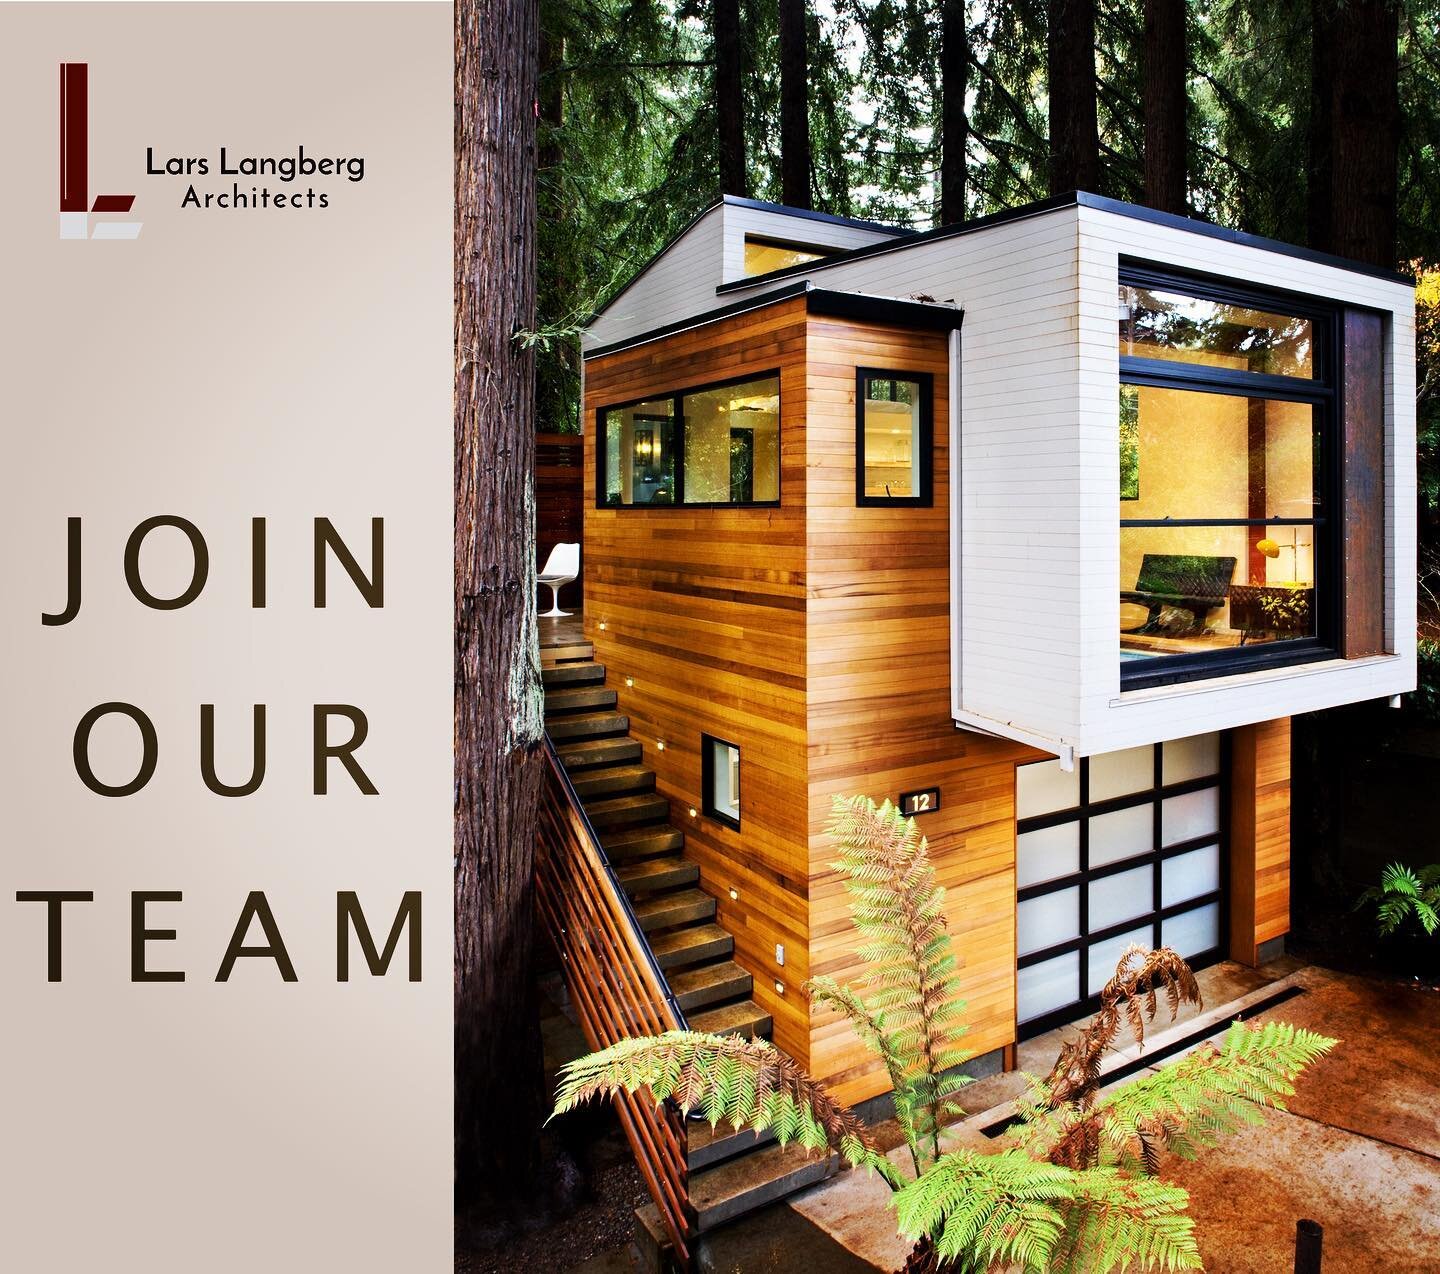 We are looking for talented, creative thinkers to join our local Sebastopol office team in beautiful wine country! See the full job description and apply through the link in our profile. Please feel free to share with someone you feel would love this